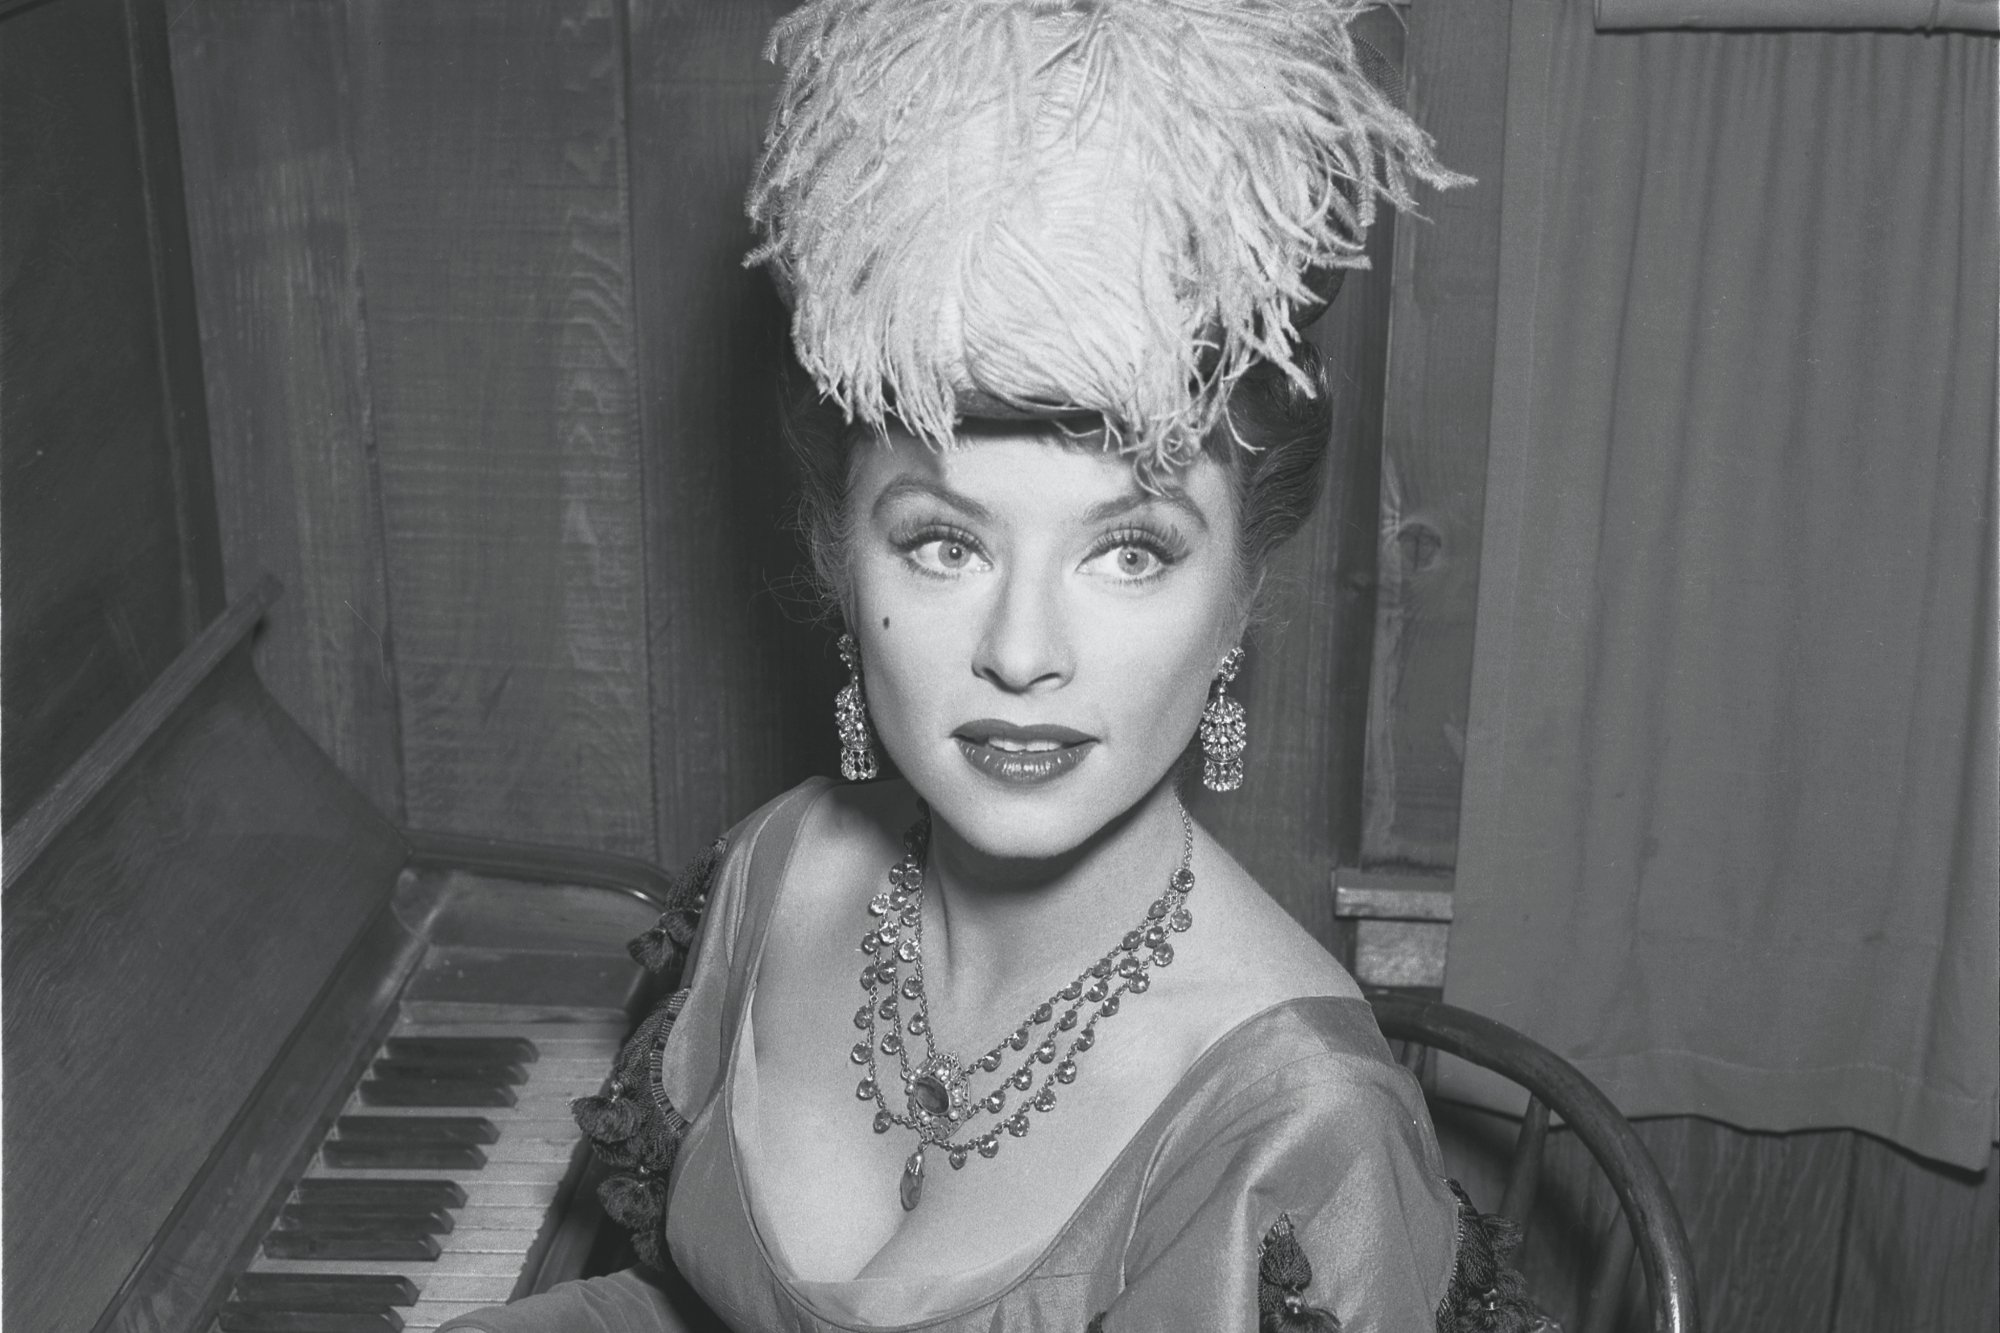 'Gunsmoke' Amanda Blake as Miss Kitty Russell in her Western costume sitting at the piano with her fingers on the keys